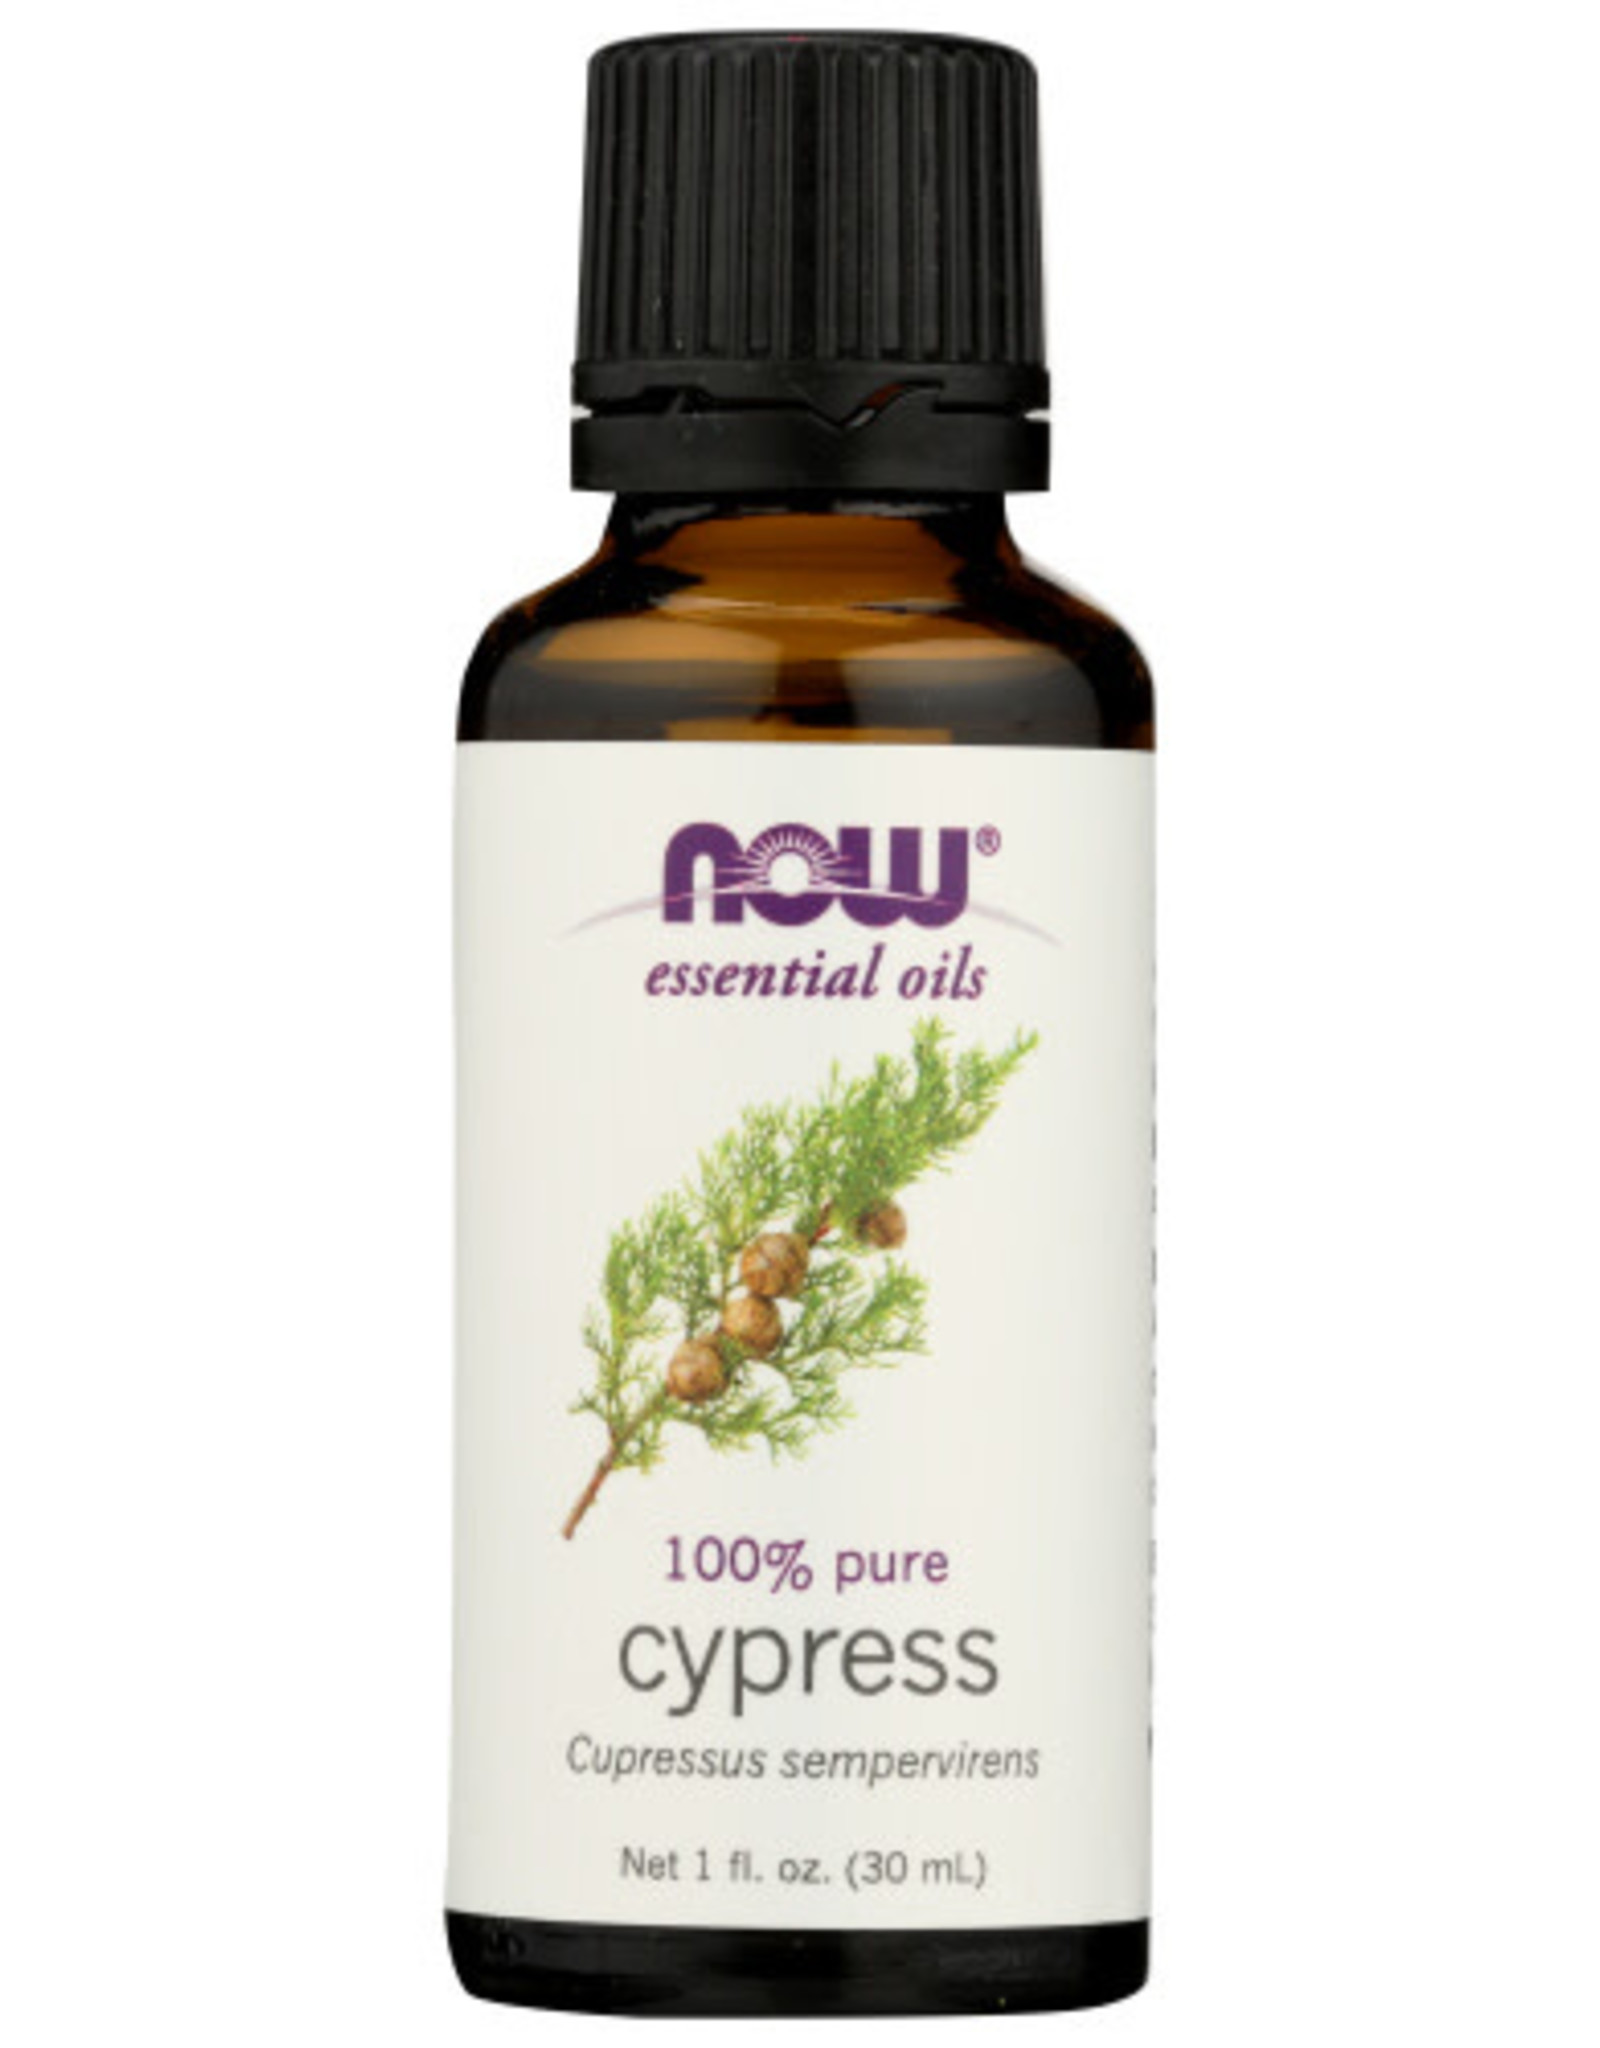 NOW® NOW PURE CYPRESS OIL, 1 FL. OZ.